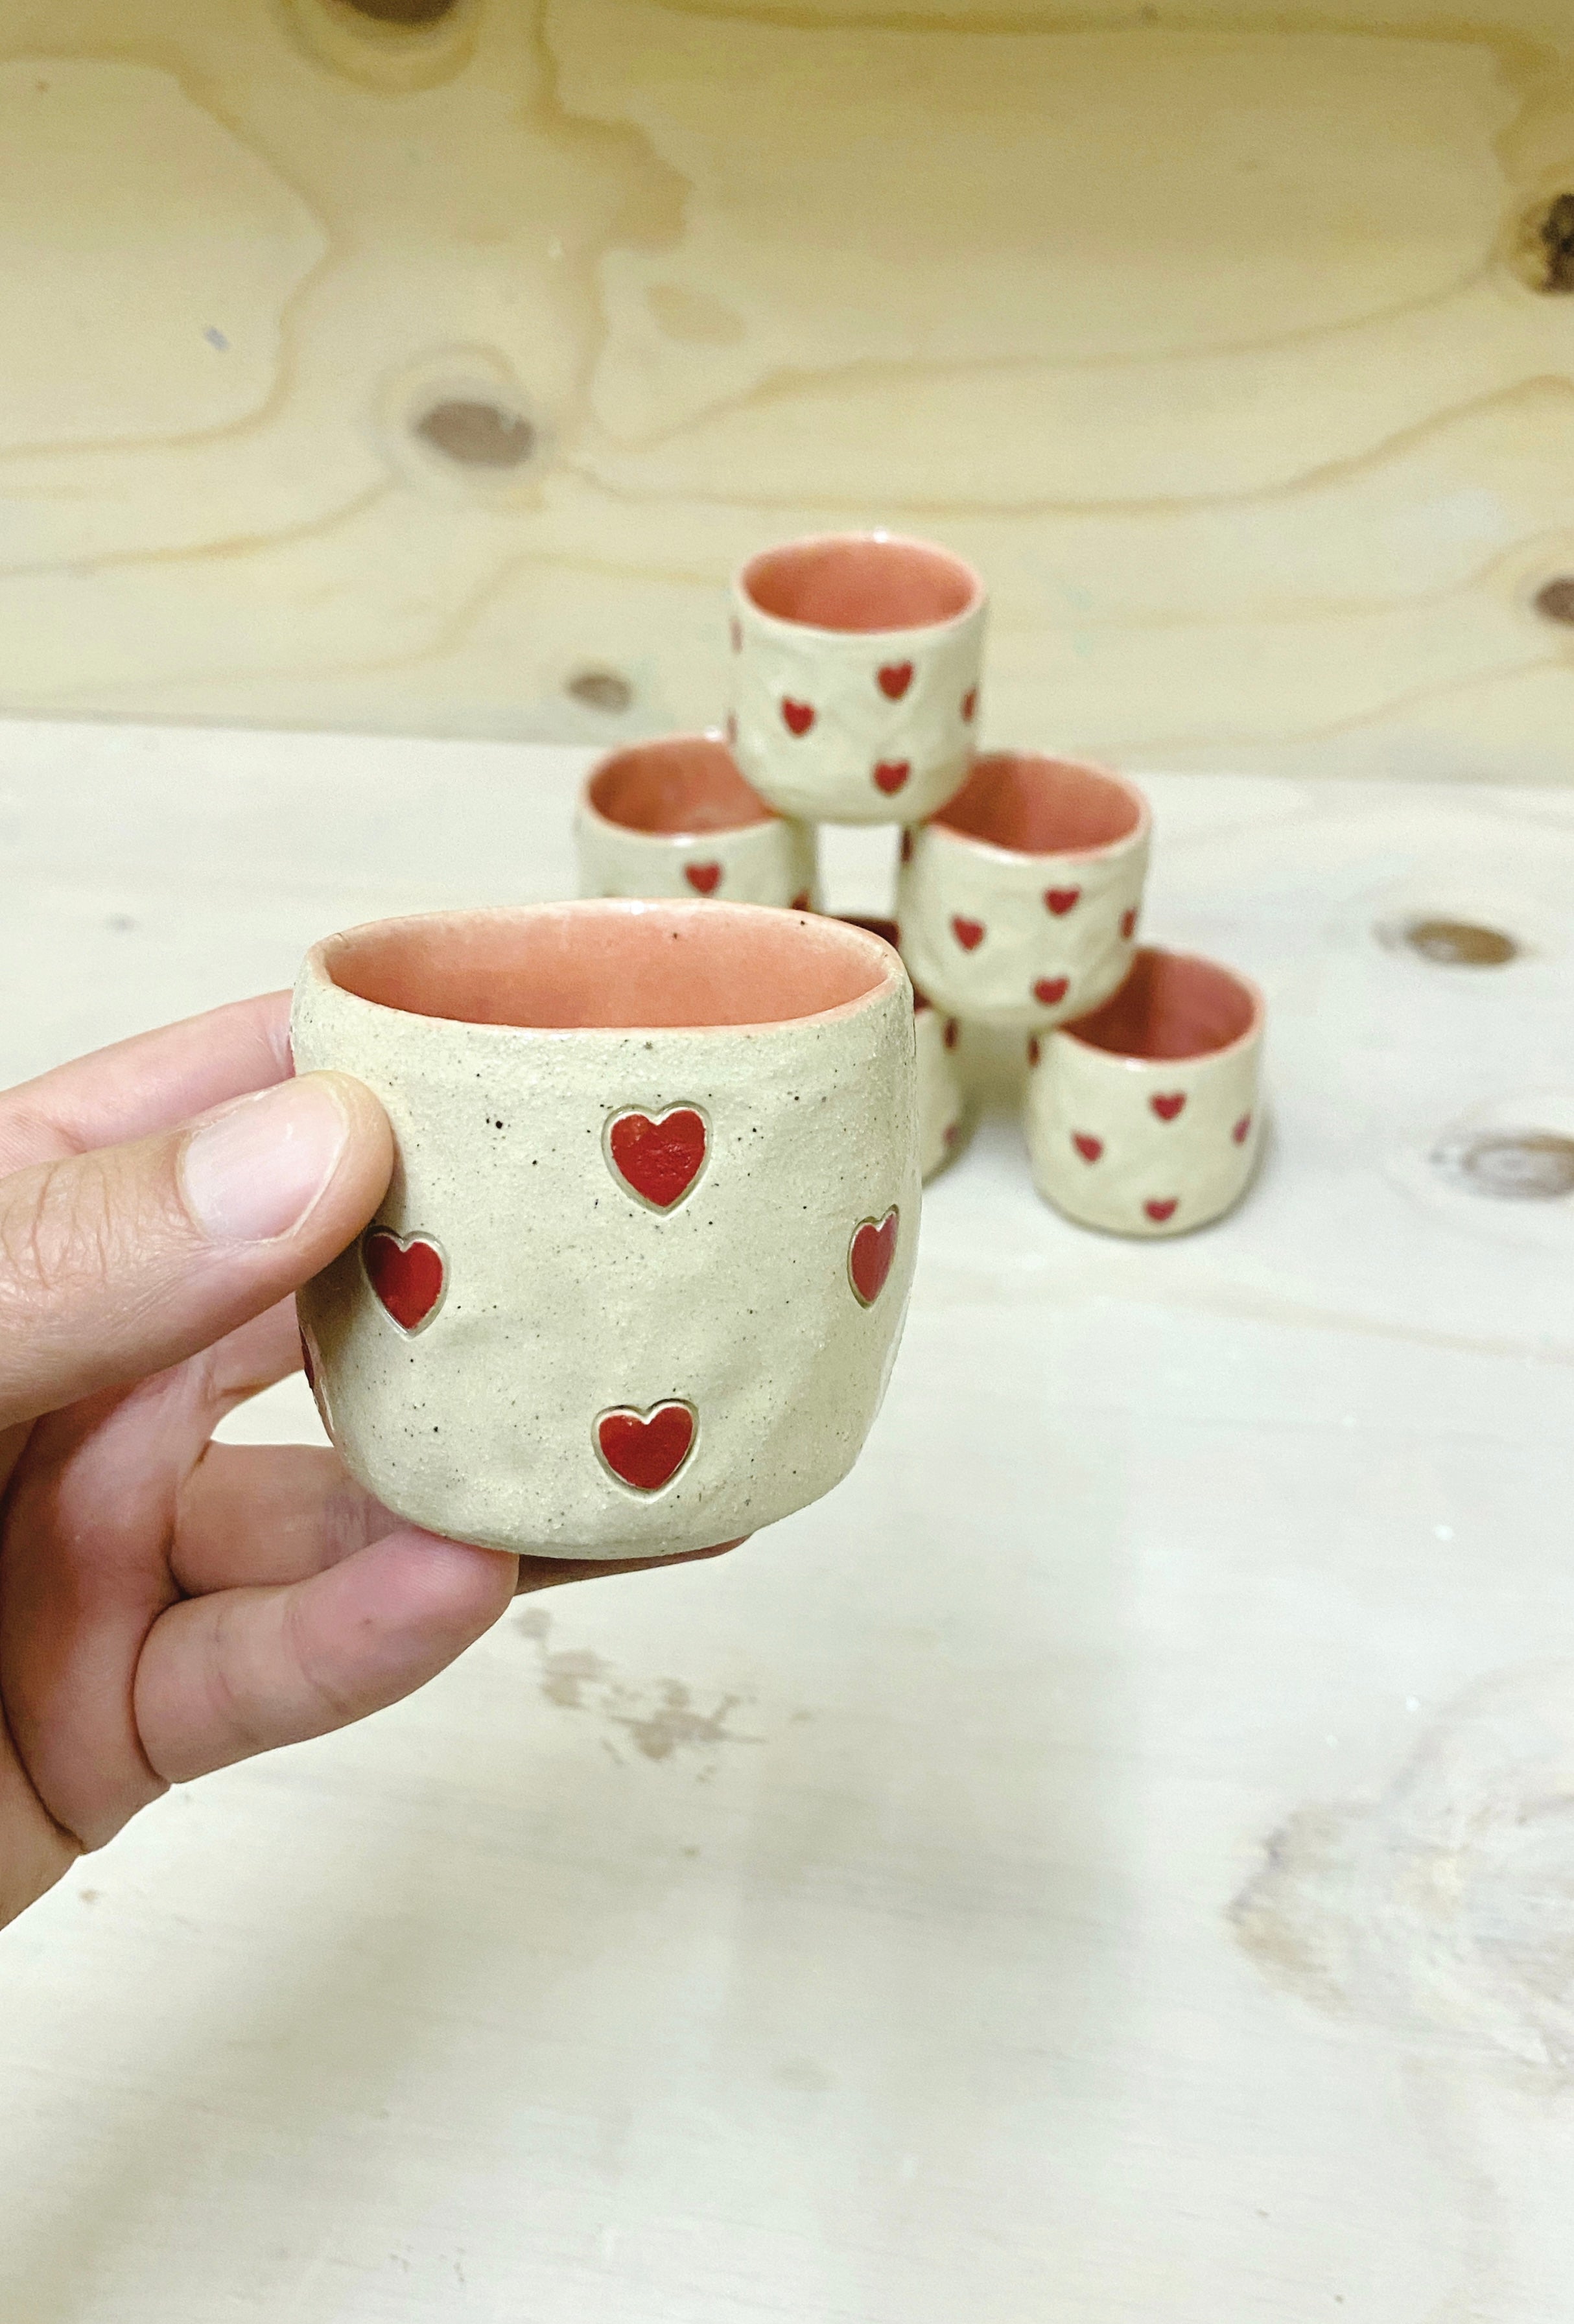 Ceramic Espresso Cups and Saucers, 2 fl. oz ׀ Handmade Pottery Cups – Mad  About Pottery